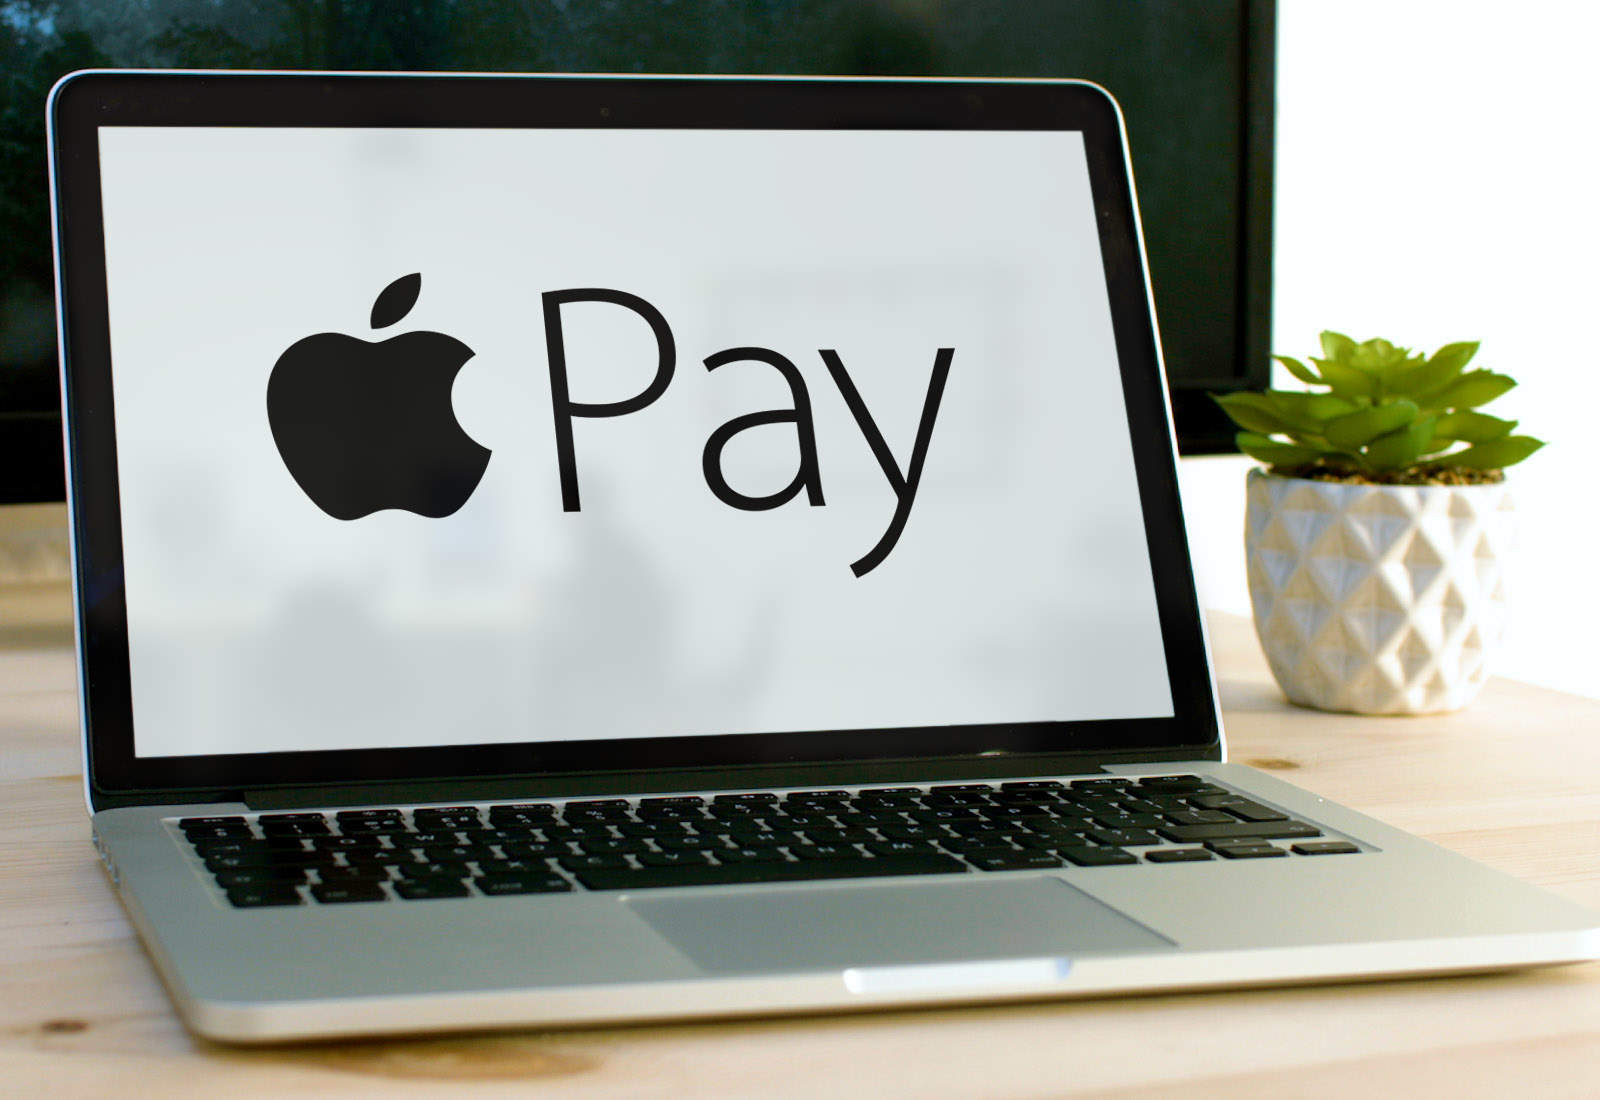 Antitrust investigators want to know if retailers were compelled to use Apple Pay